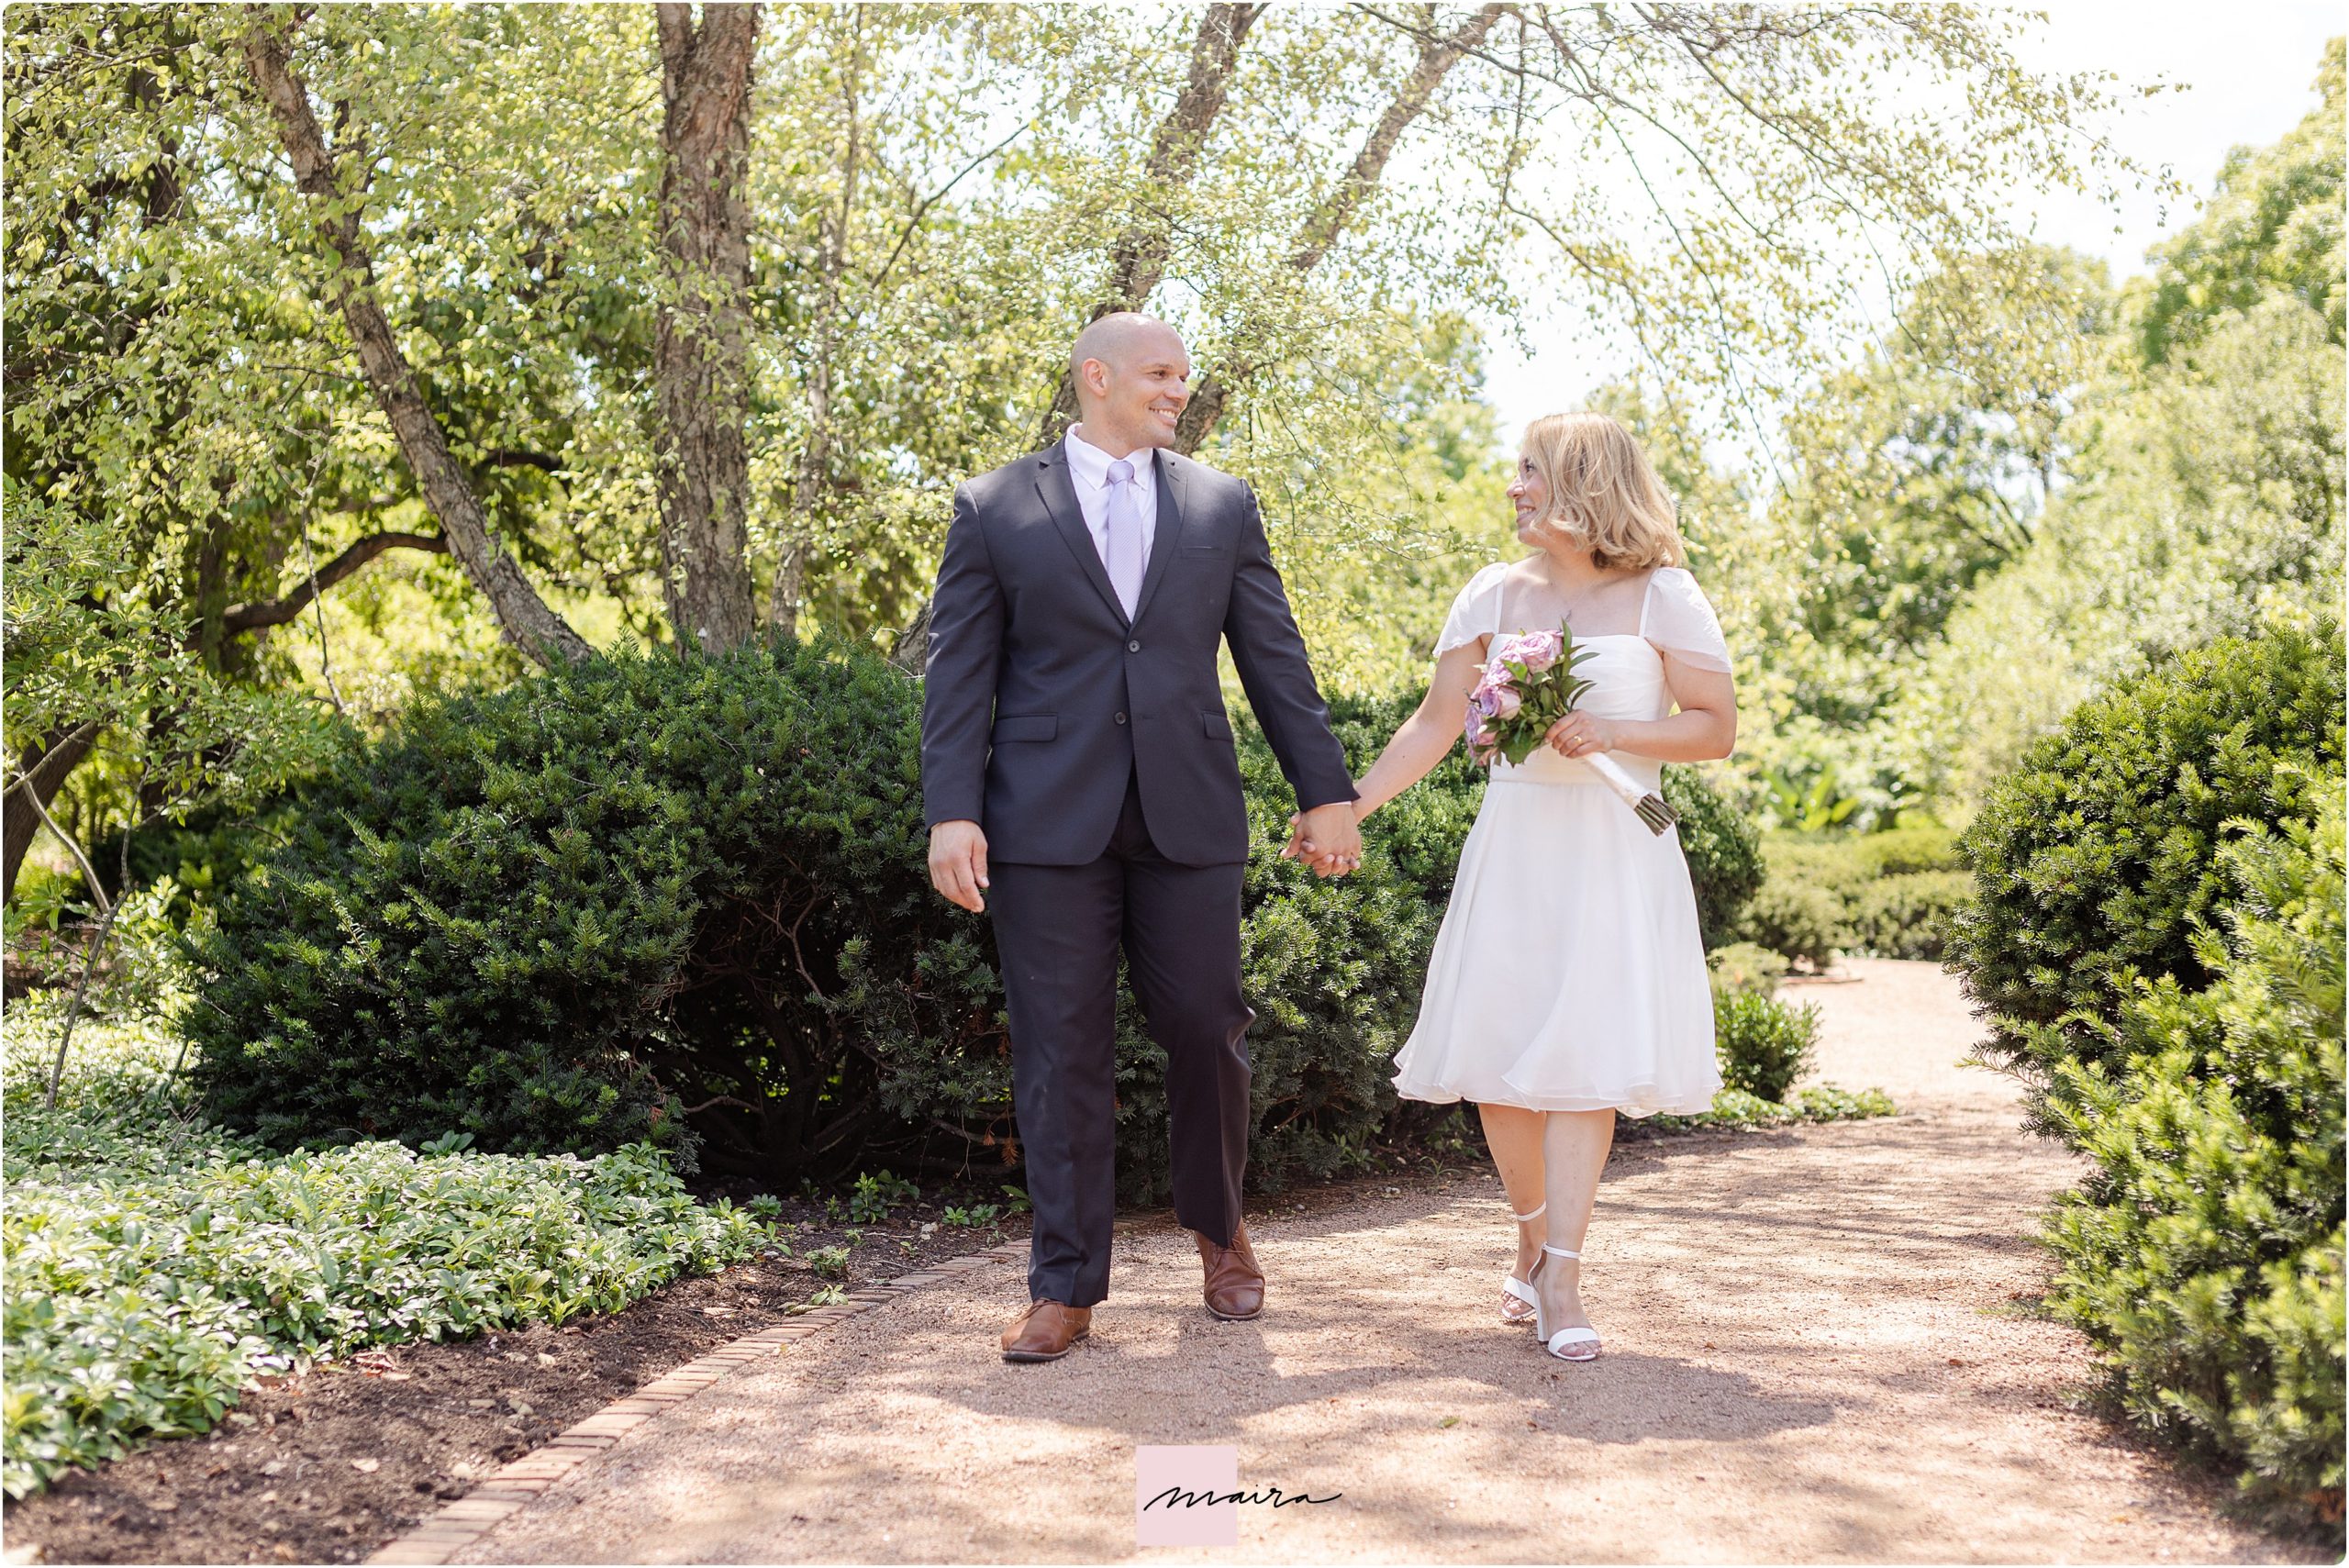 Dupage Courthouse in Wheaton Wedding, Beautiful Courthouse Wedding in Dupage, IL Maira Ochoa Photography, Bride and Groom Portraits in Cantigny Park, IL